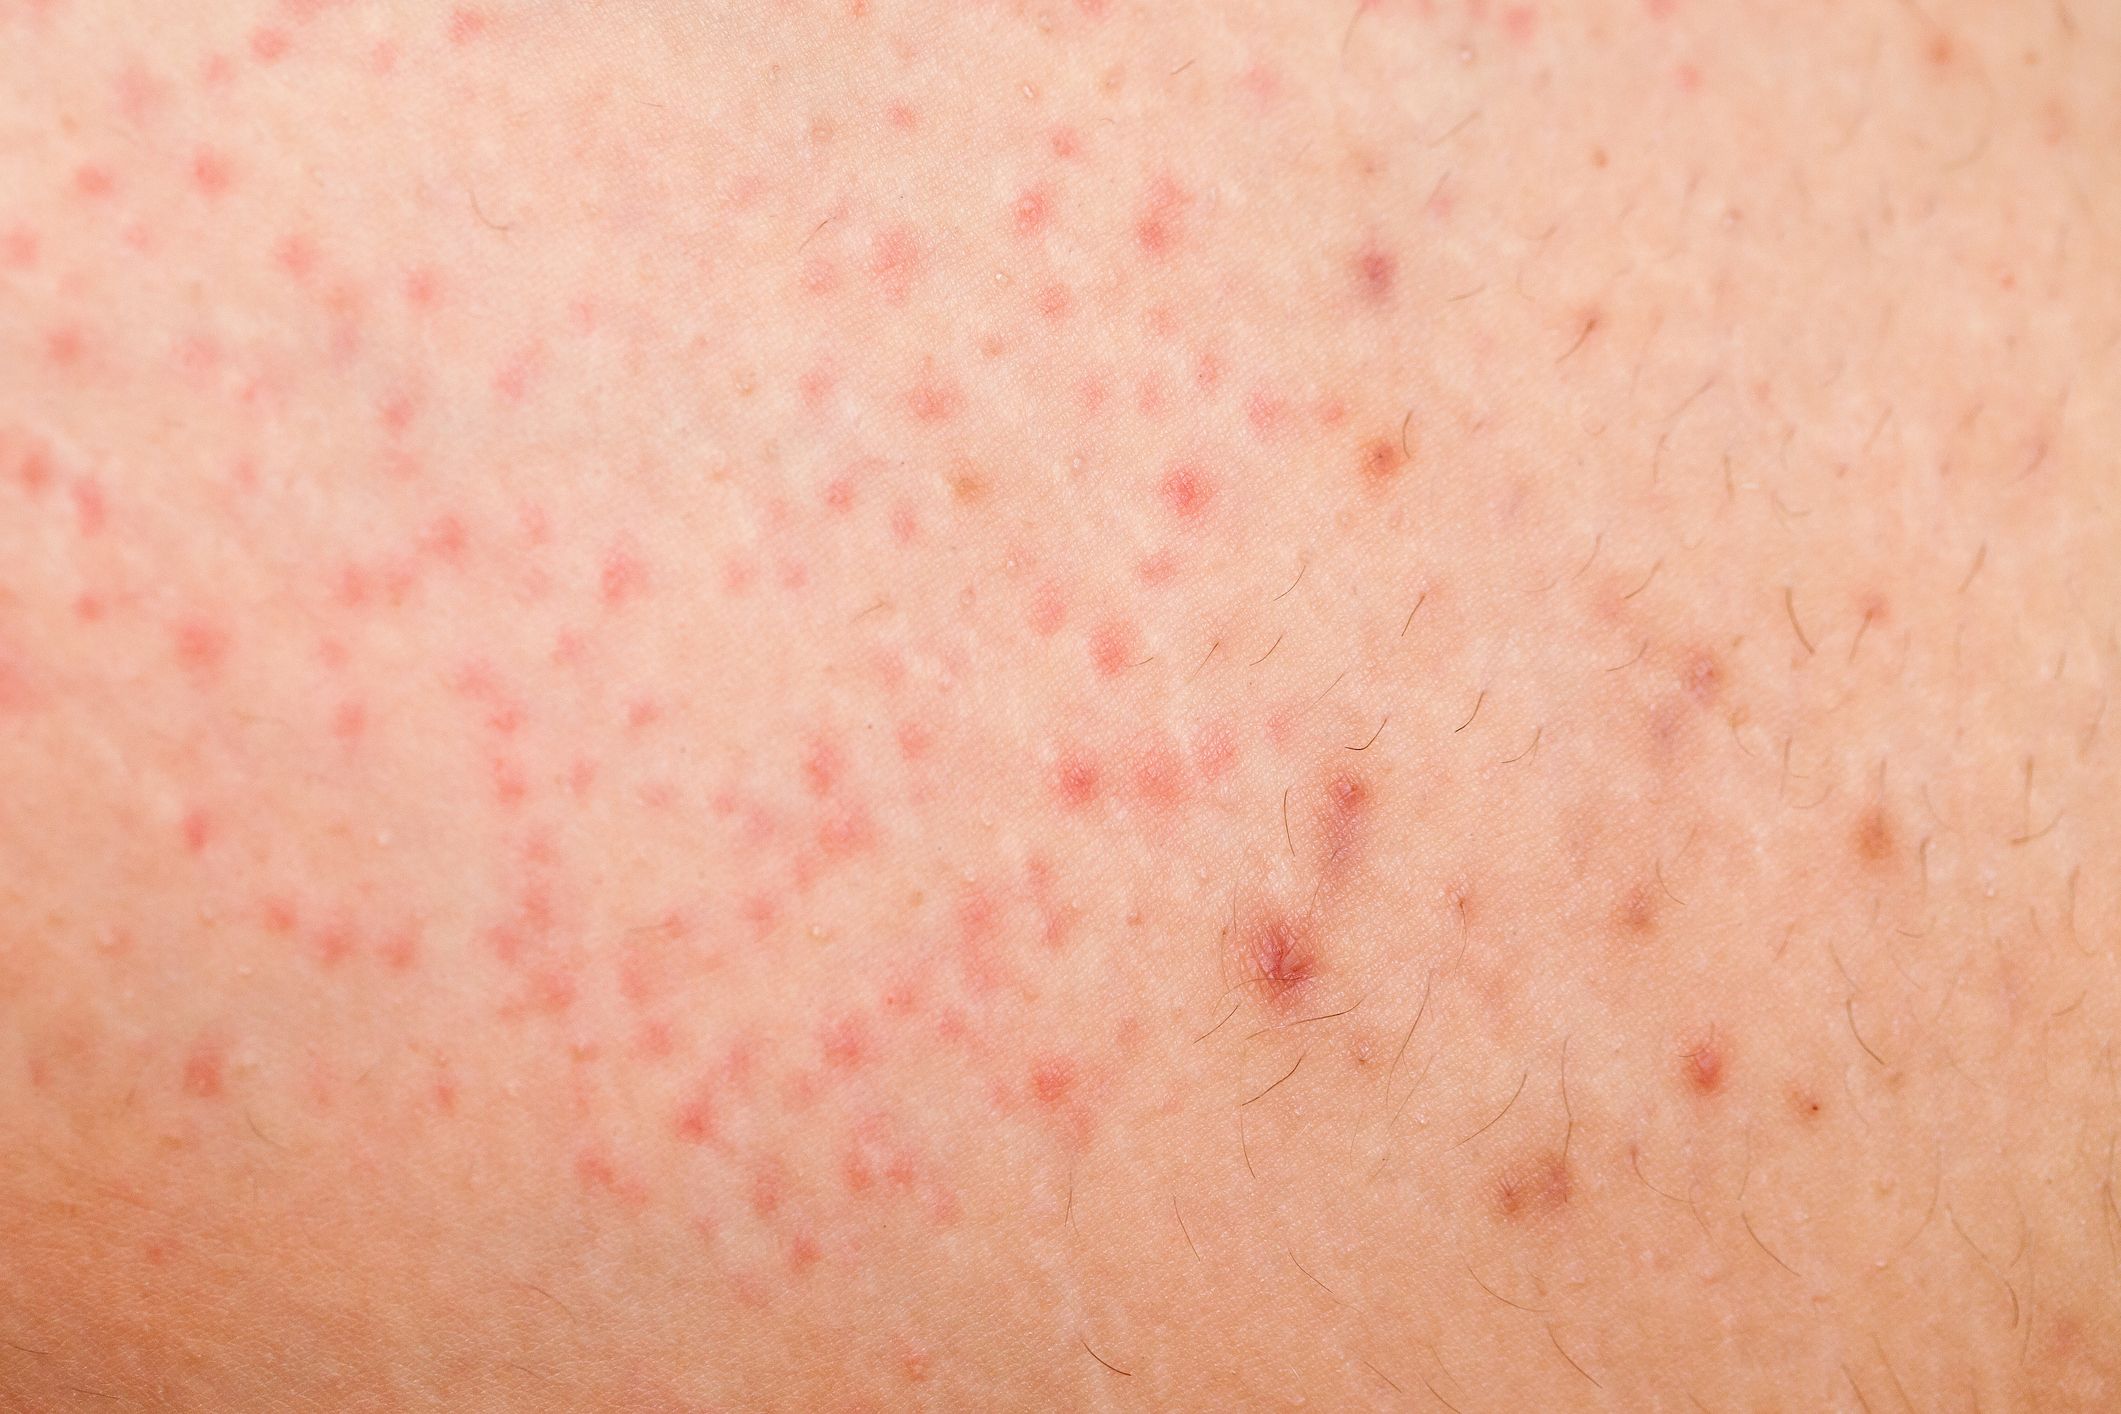 pinpoint rash with itching